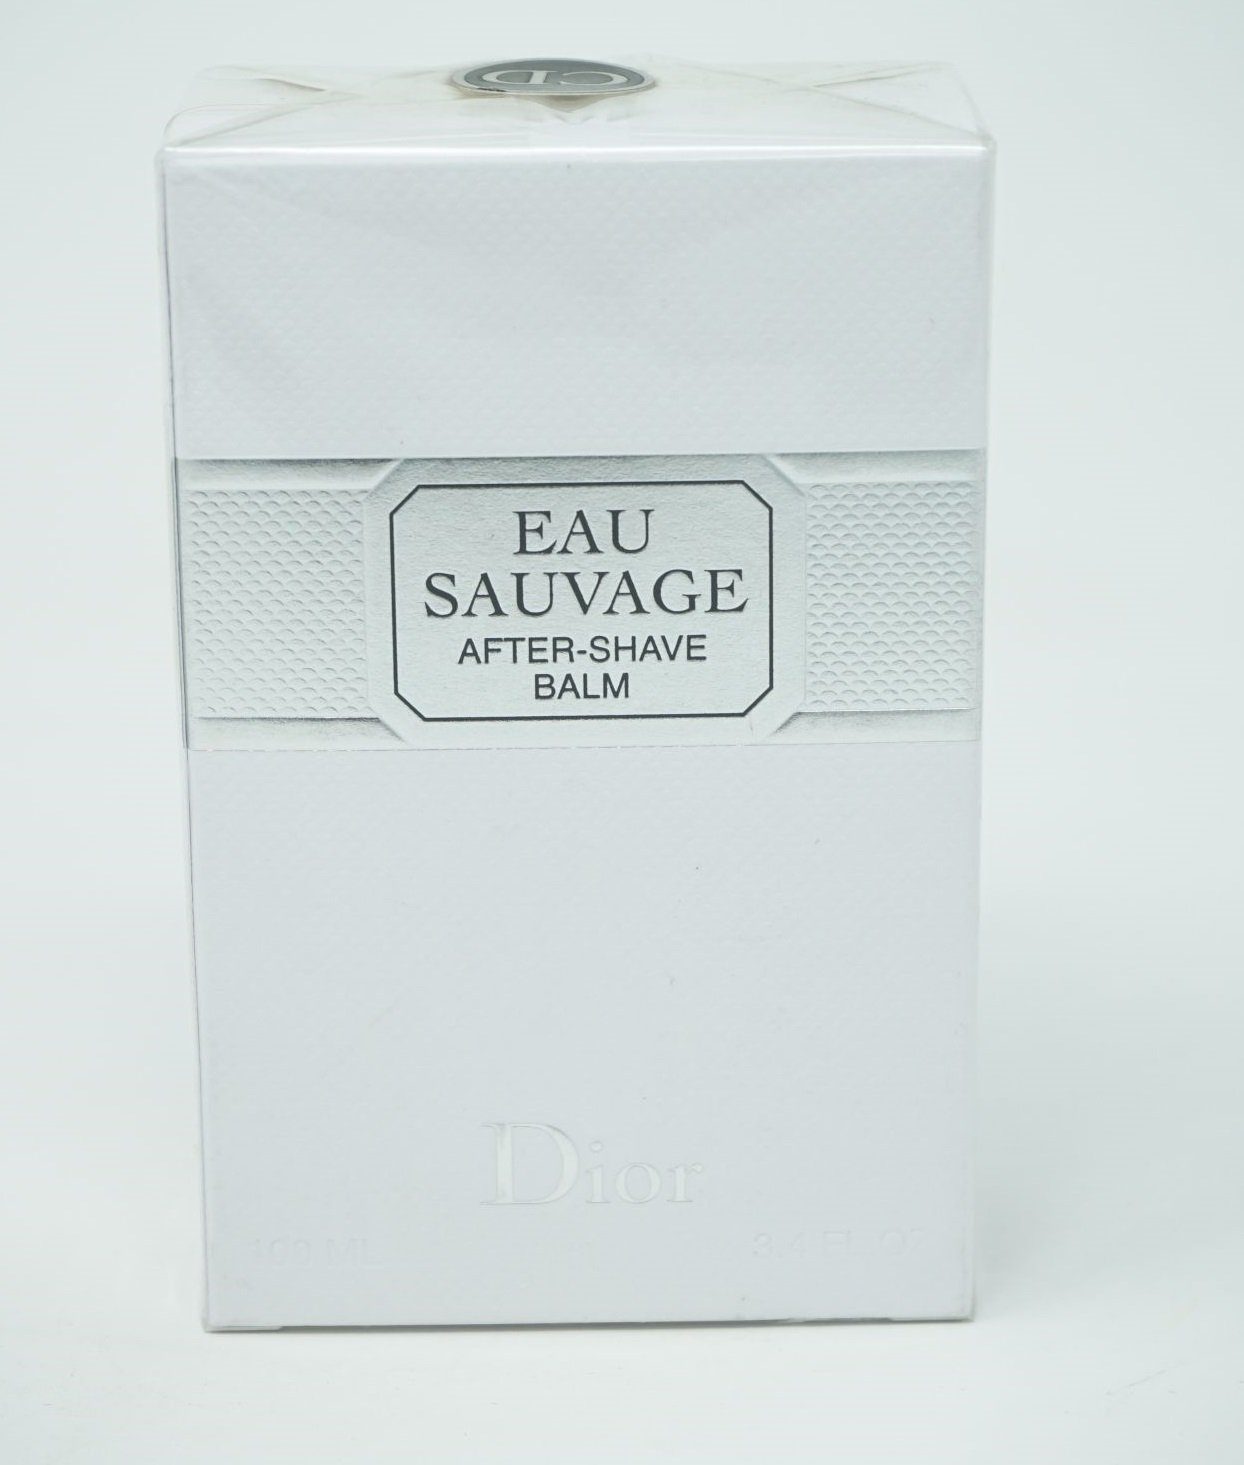 Shave After Sauvage 100 ml Christian Eau Dior Balsam Dior Balm After-Shave